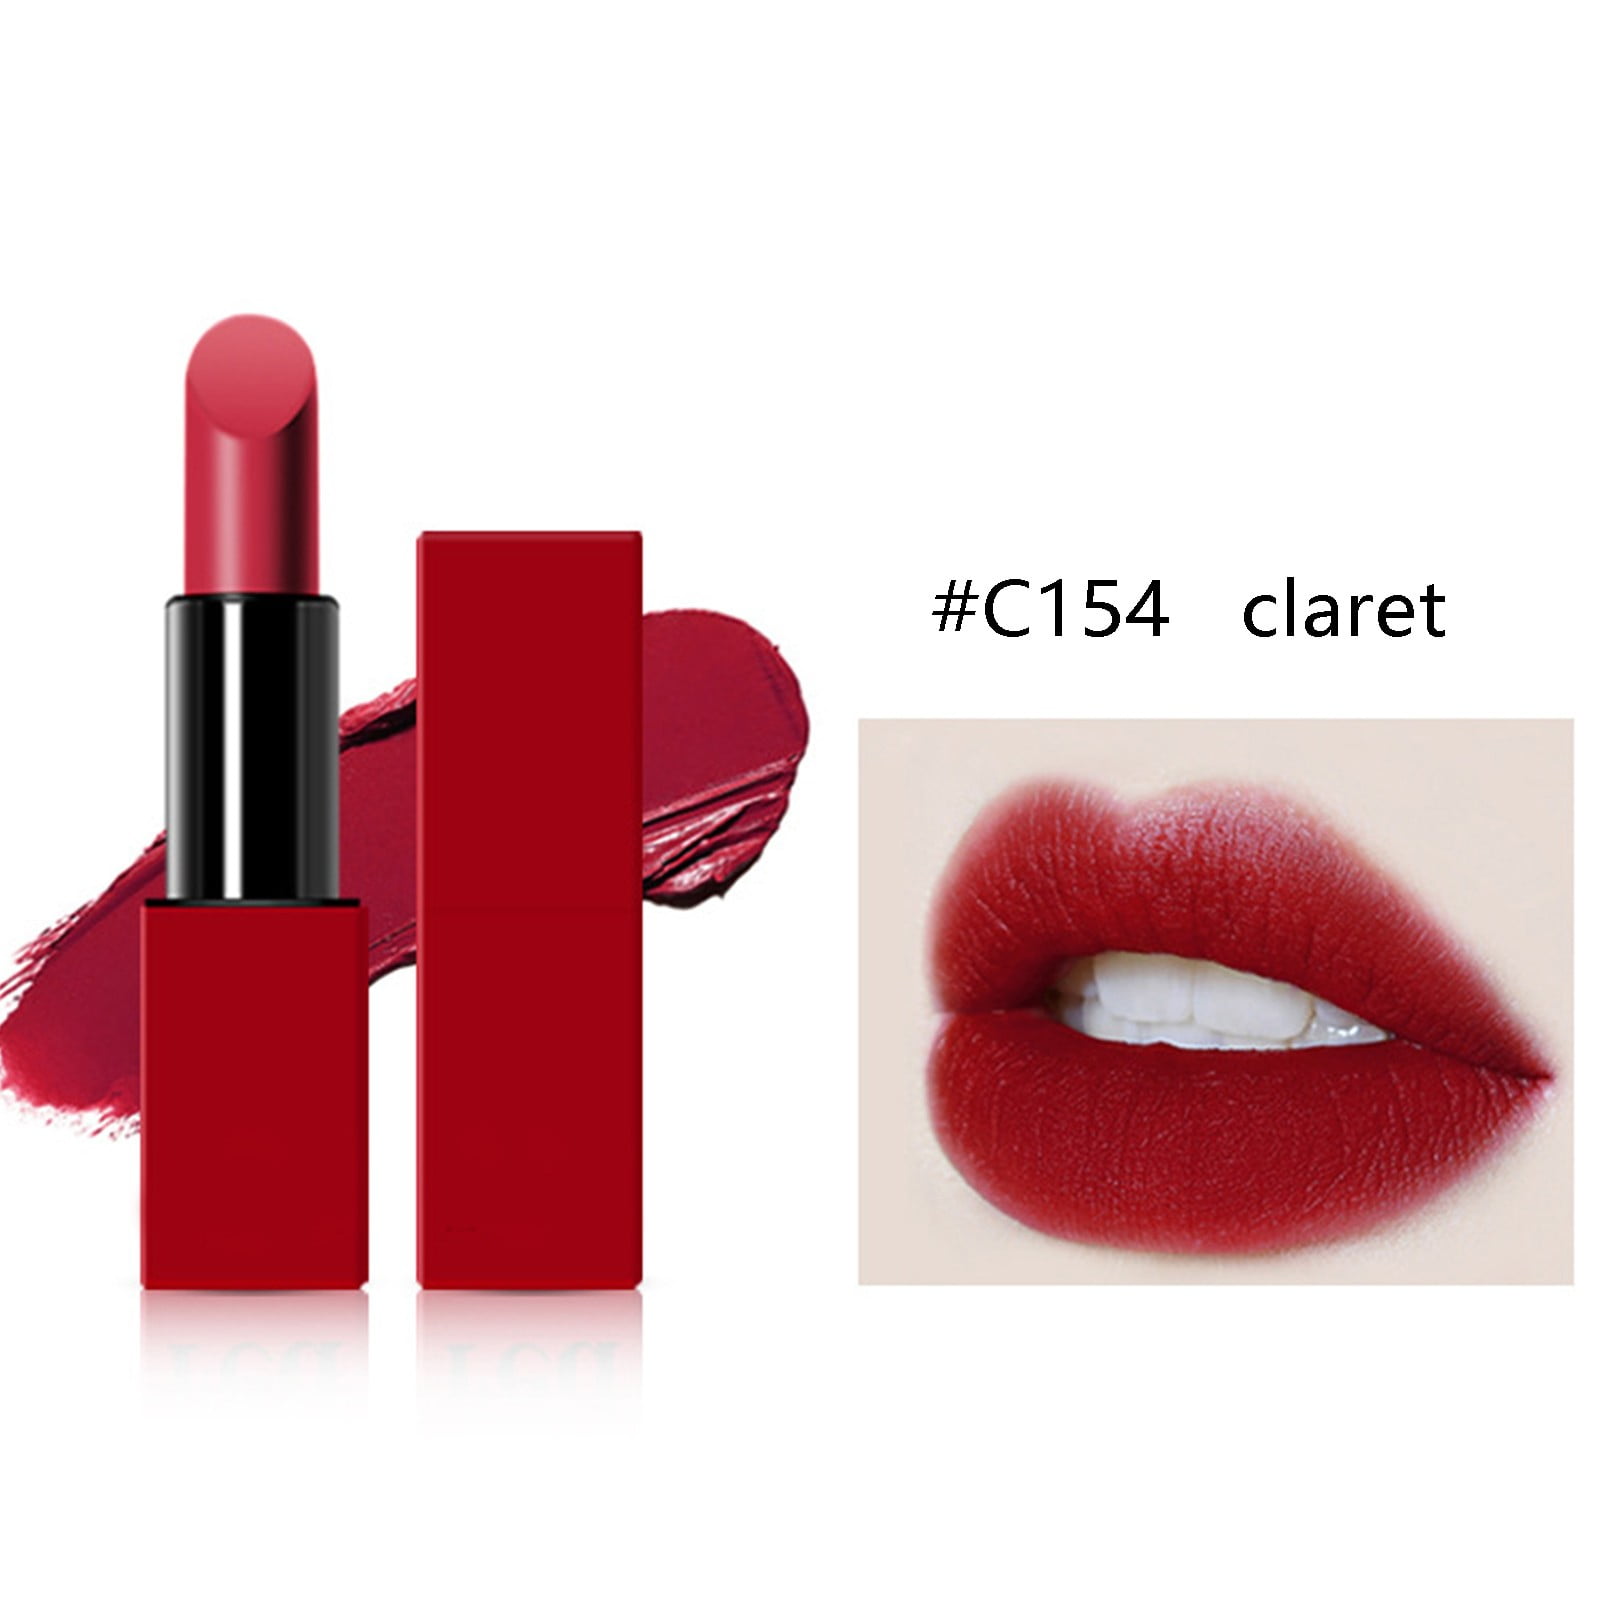 Ykohkofe Red Lip Gloss Type 10 Lipstick China Red Mattes Red Any Colors Makeup Velvet Mattes For Suitable Skin Lipstick